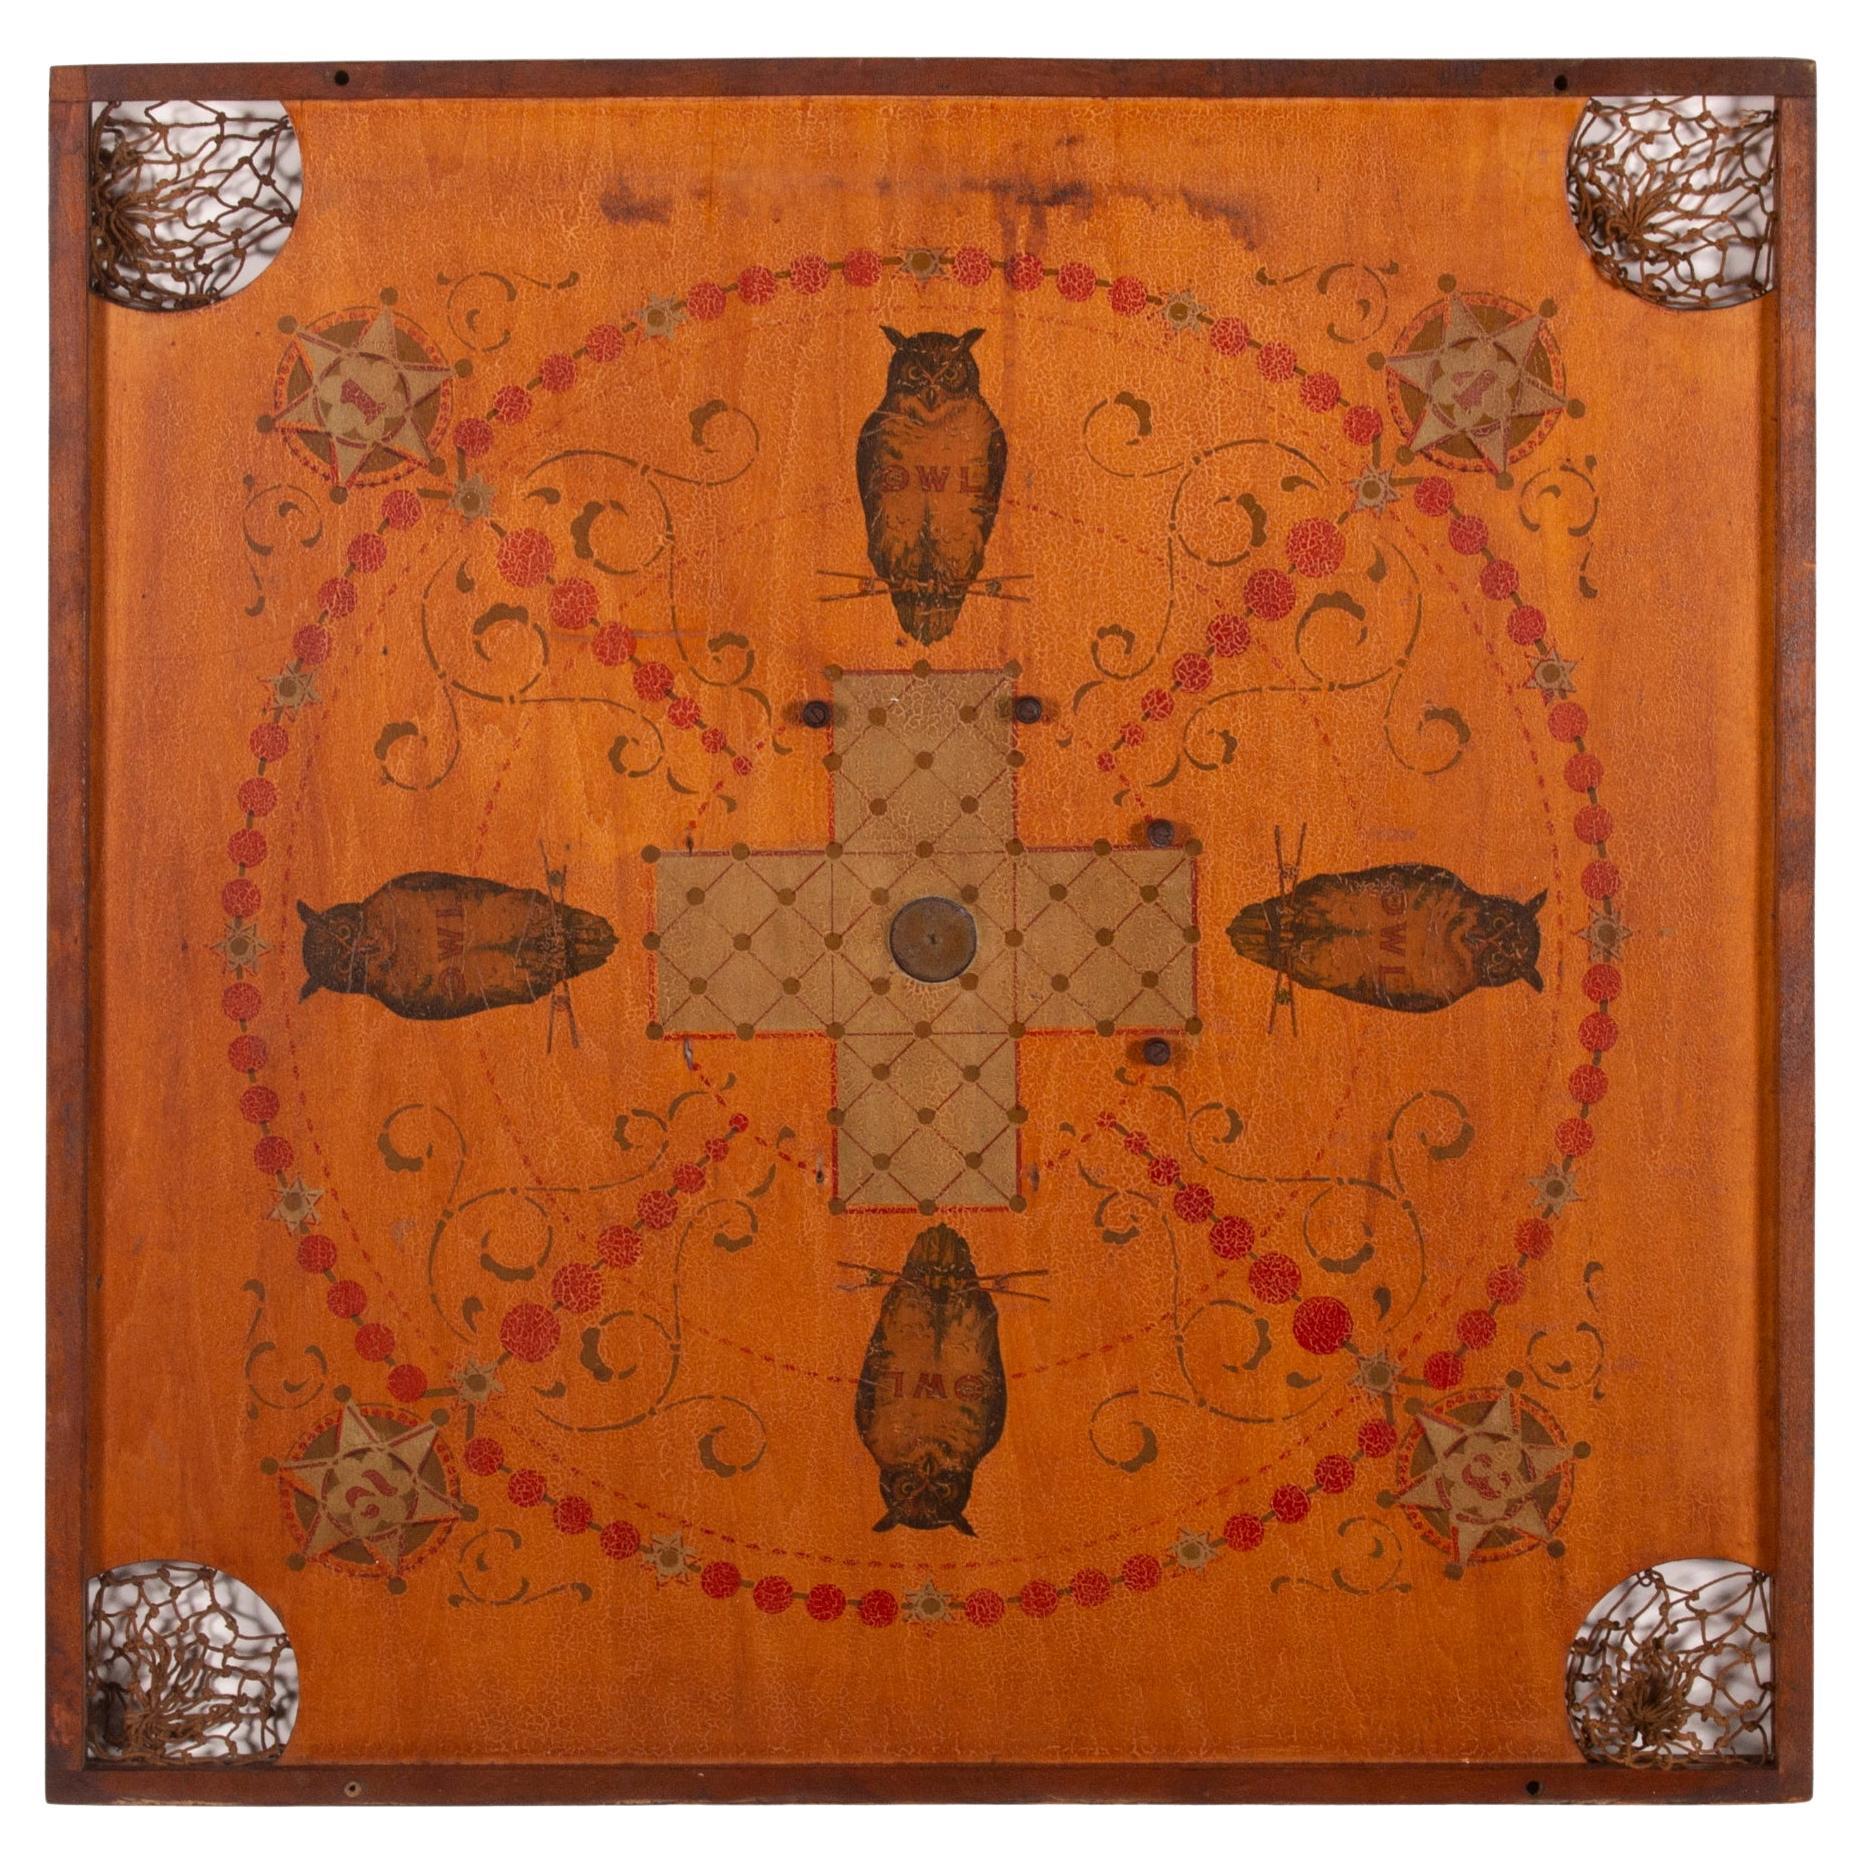 "The Owl Gameboard NO. 1" Patented by Edward Mikkelson ca 1901